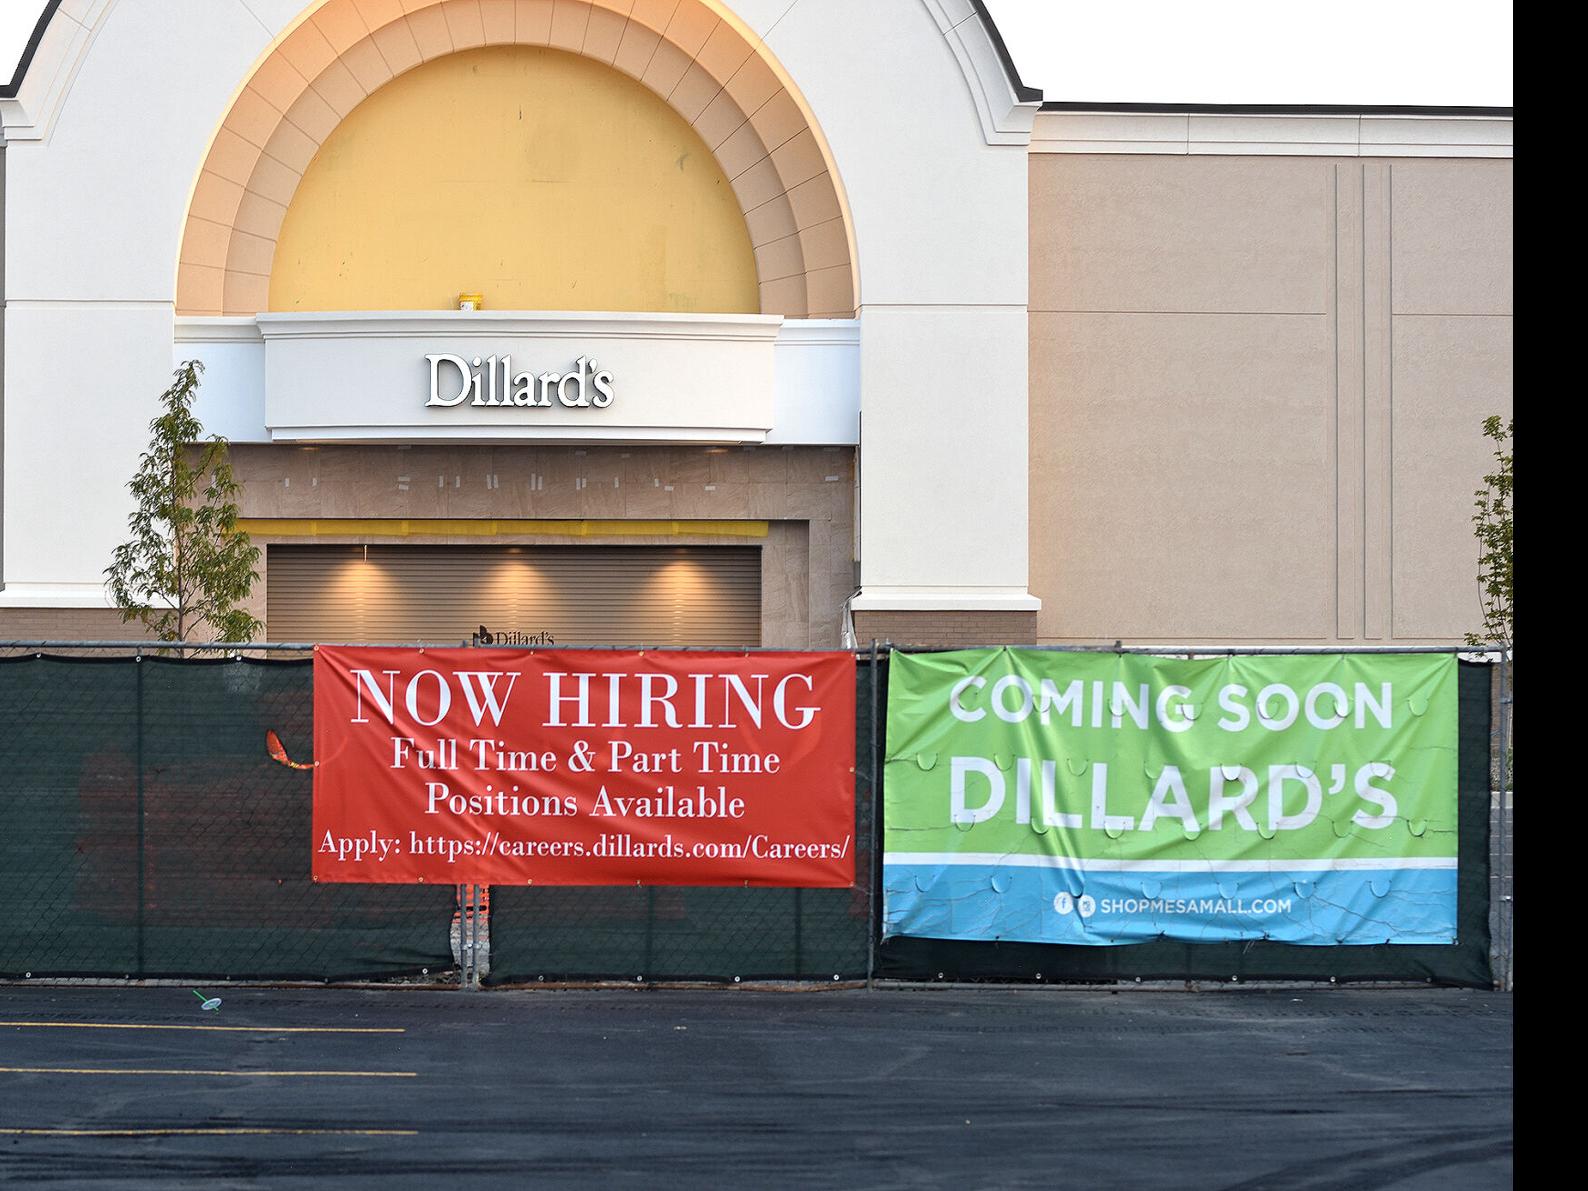 Dillard's, at new Killeen Mall location, holds grand opening event